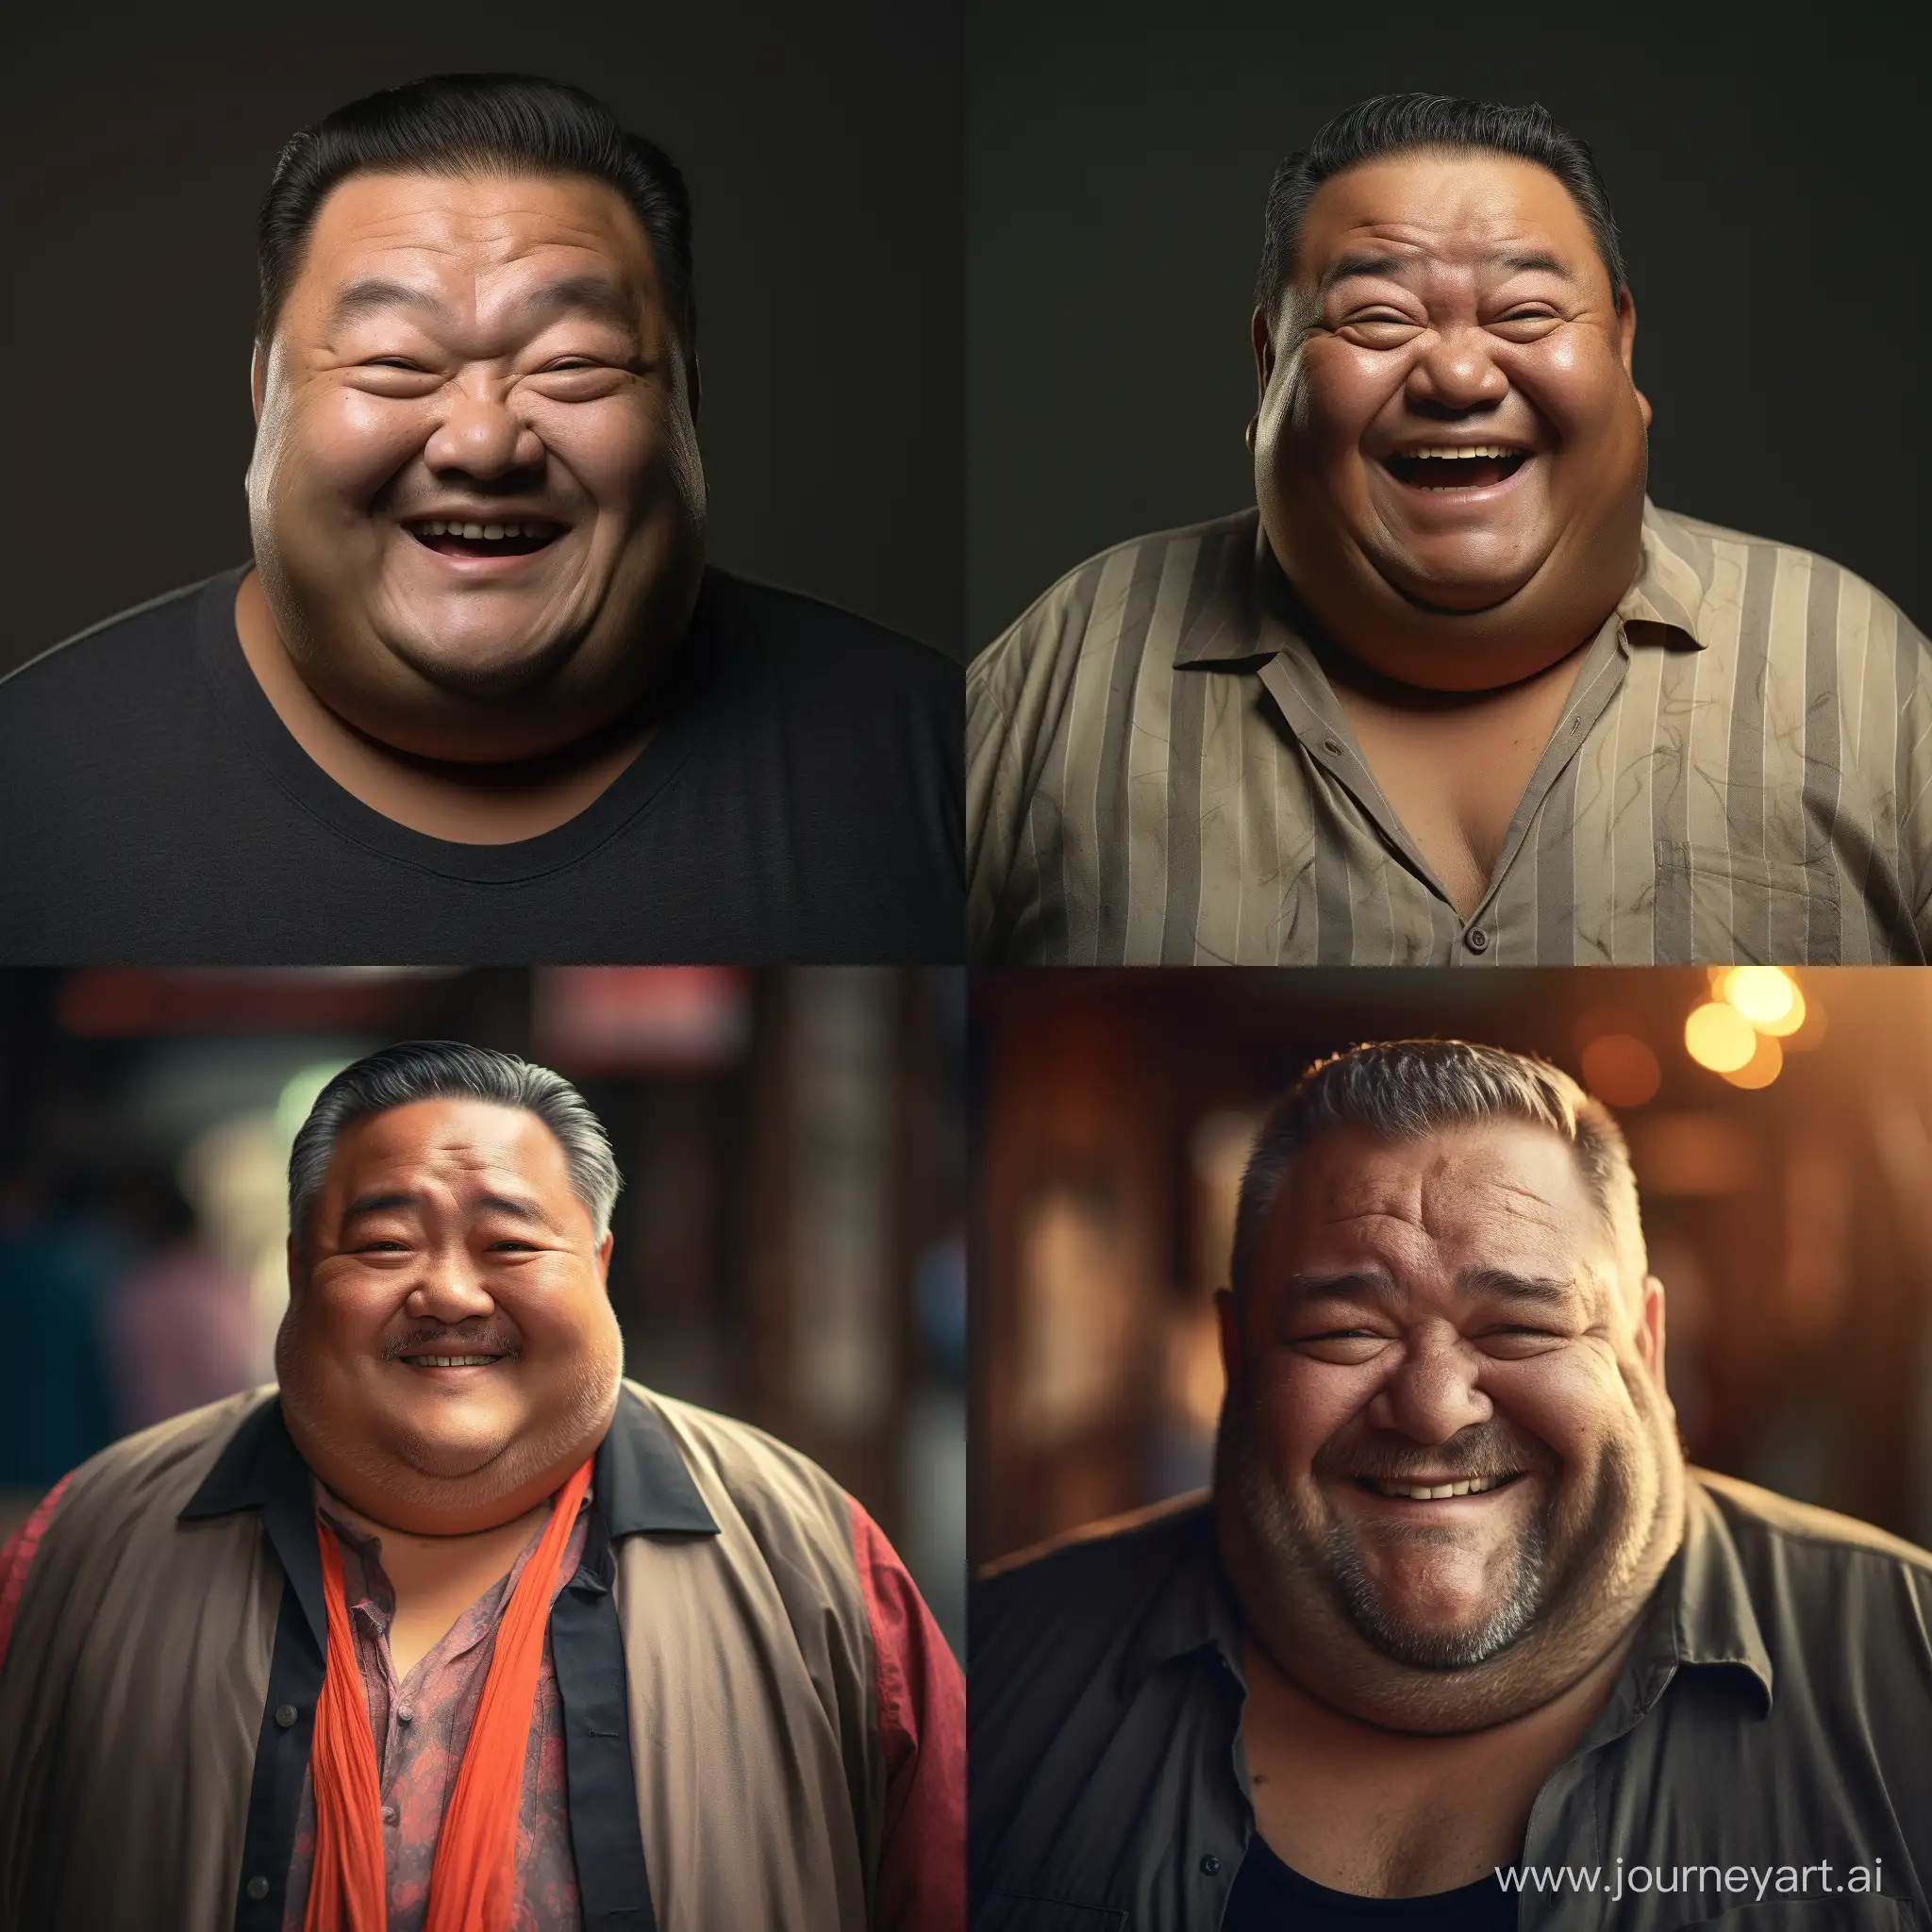 Cheerful-Chubby-Uncle-with-a-Heartwarming-Smile-in-Realistic-4K-HD